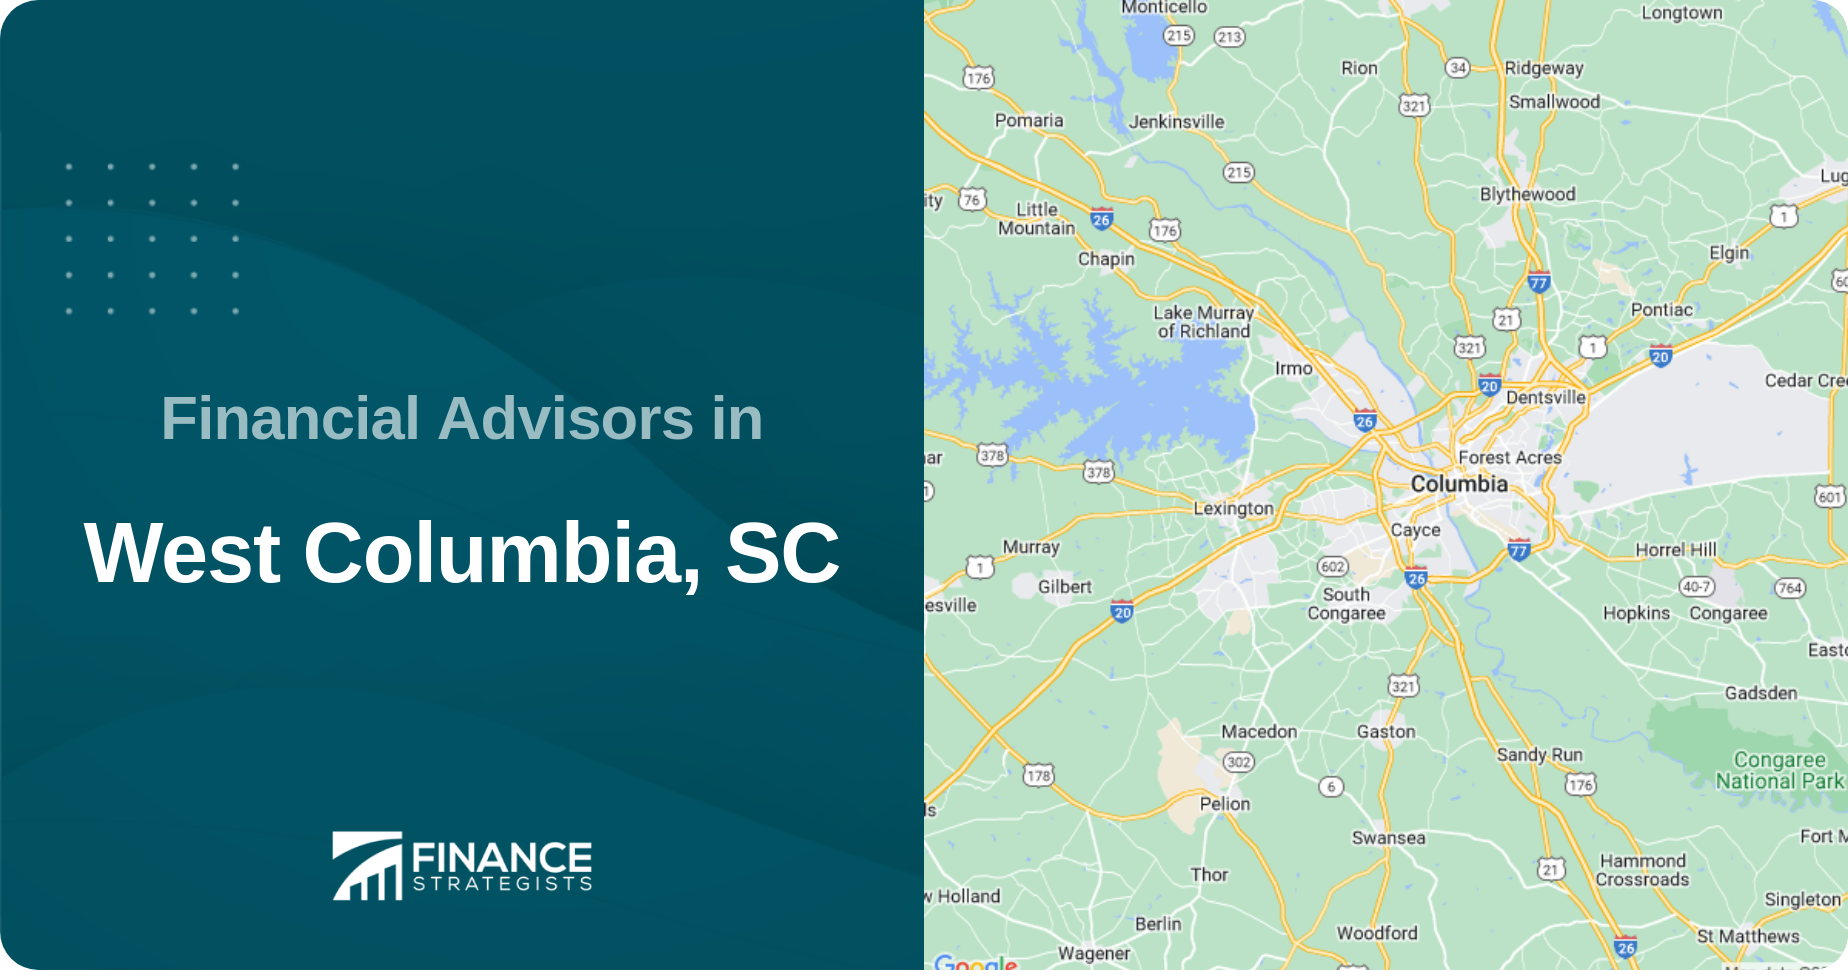 Financial Advisors in West Columbia, SC